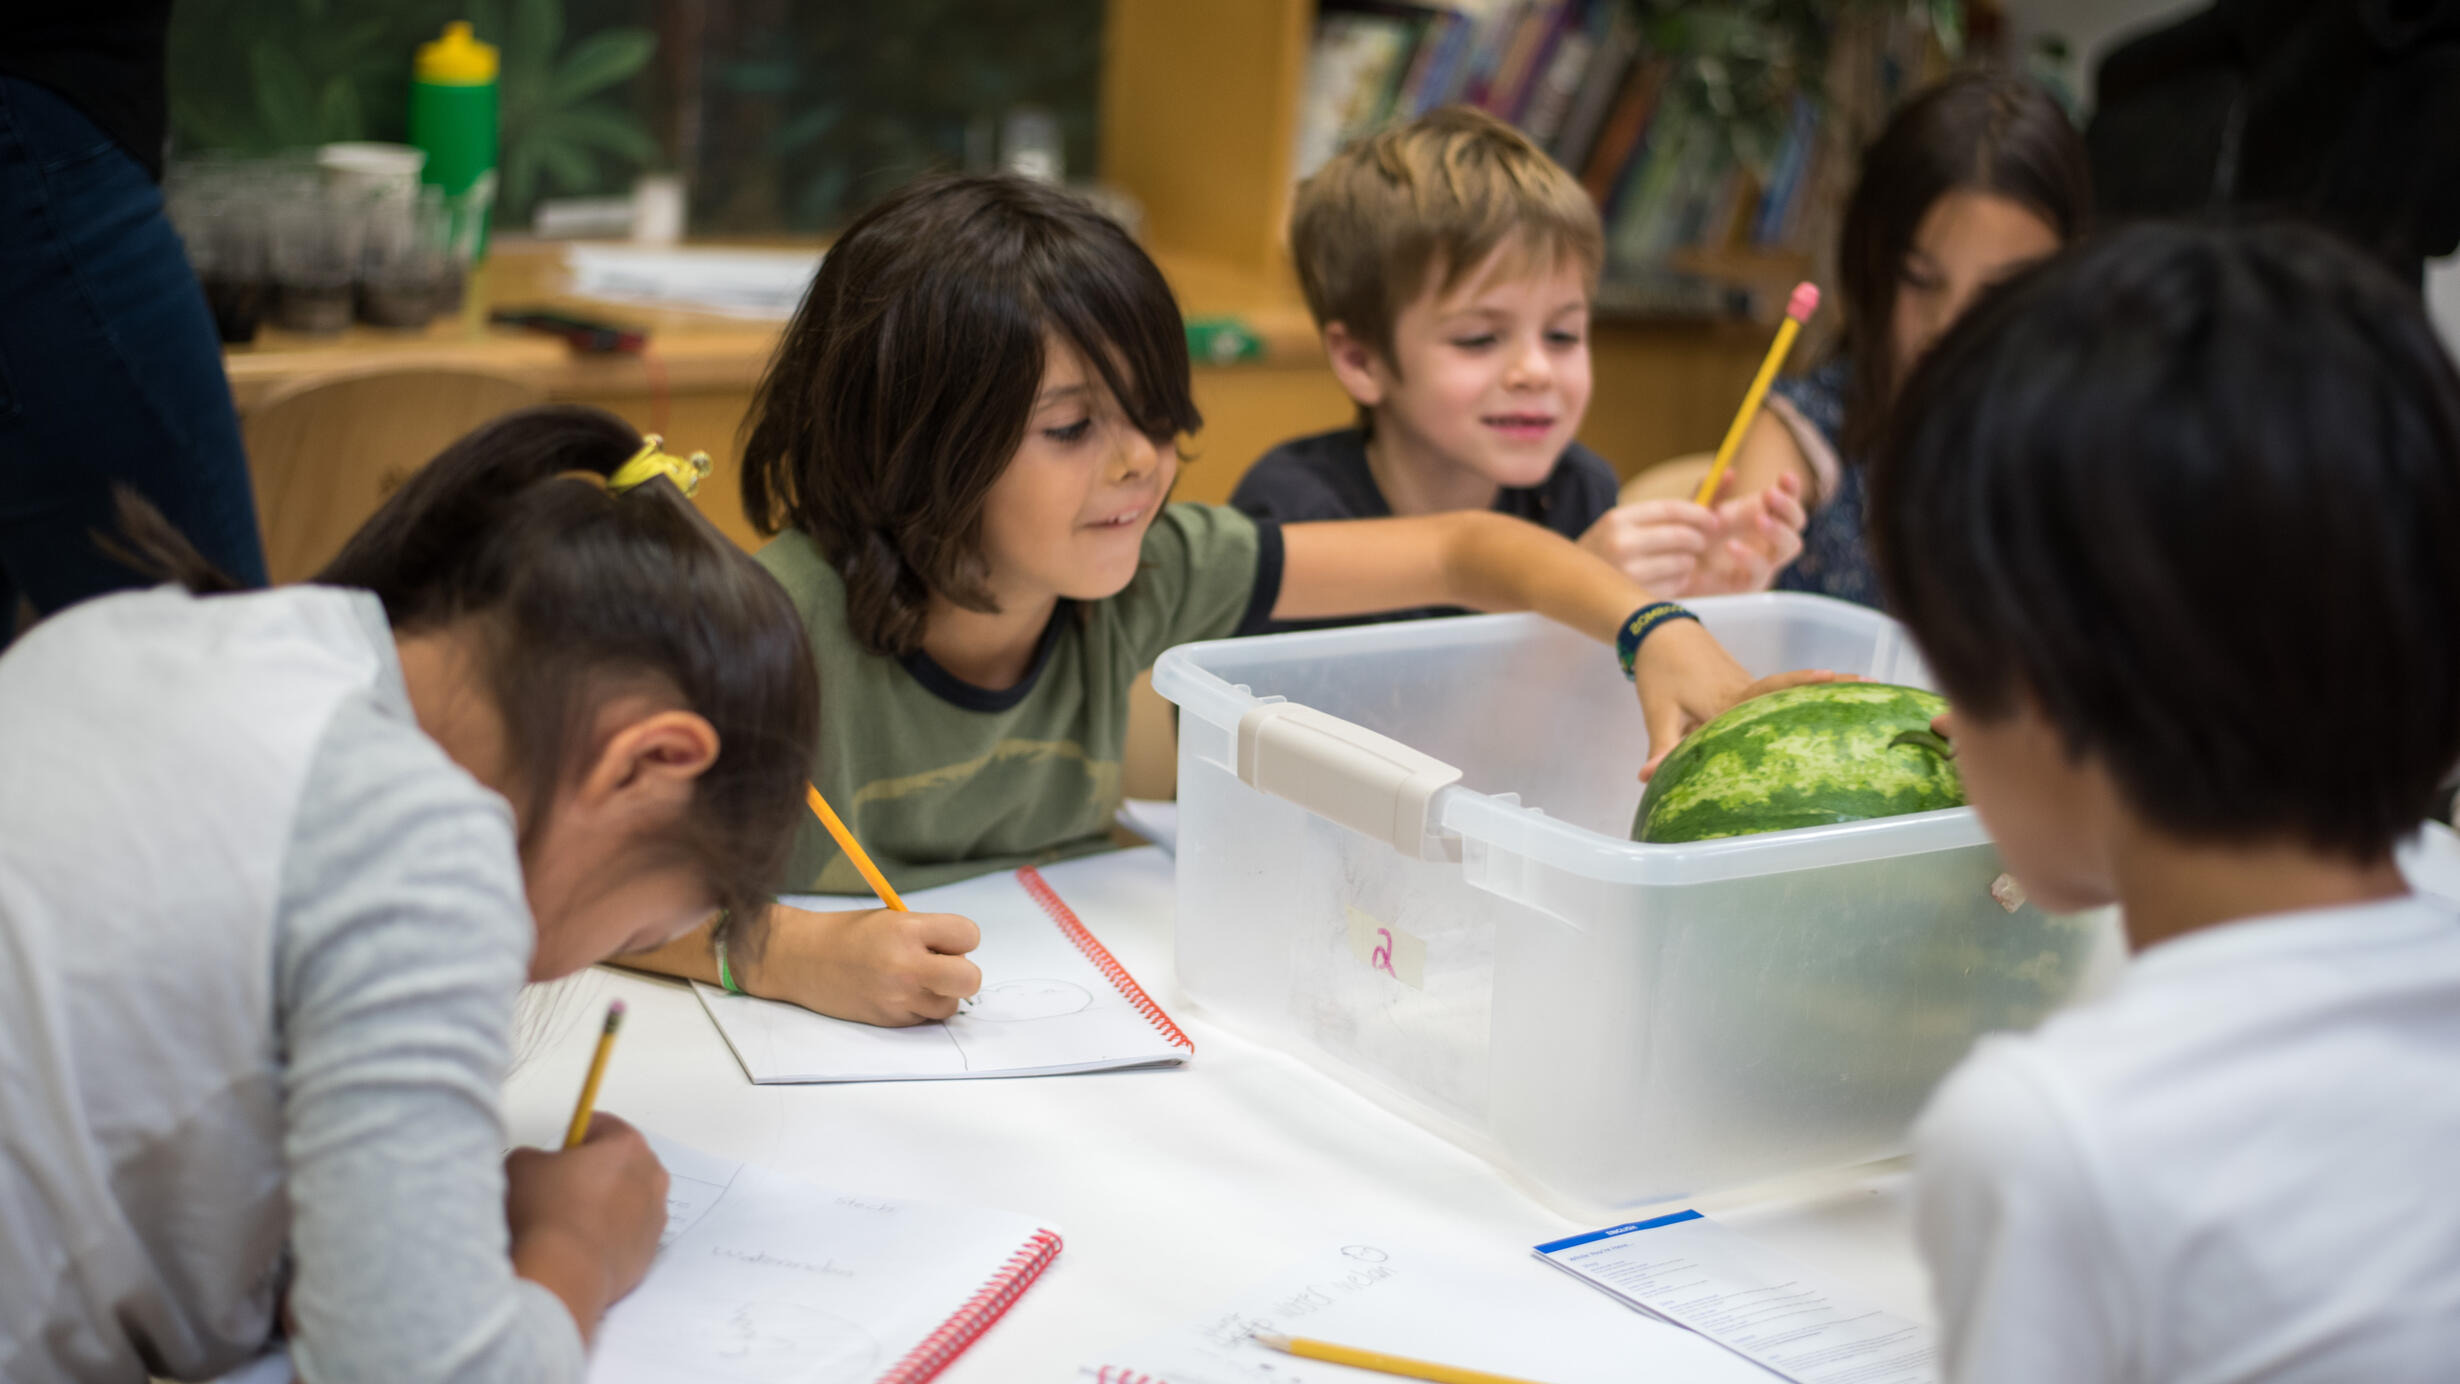 A group of students examines a watermelon and records their observations in a notebook.